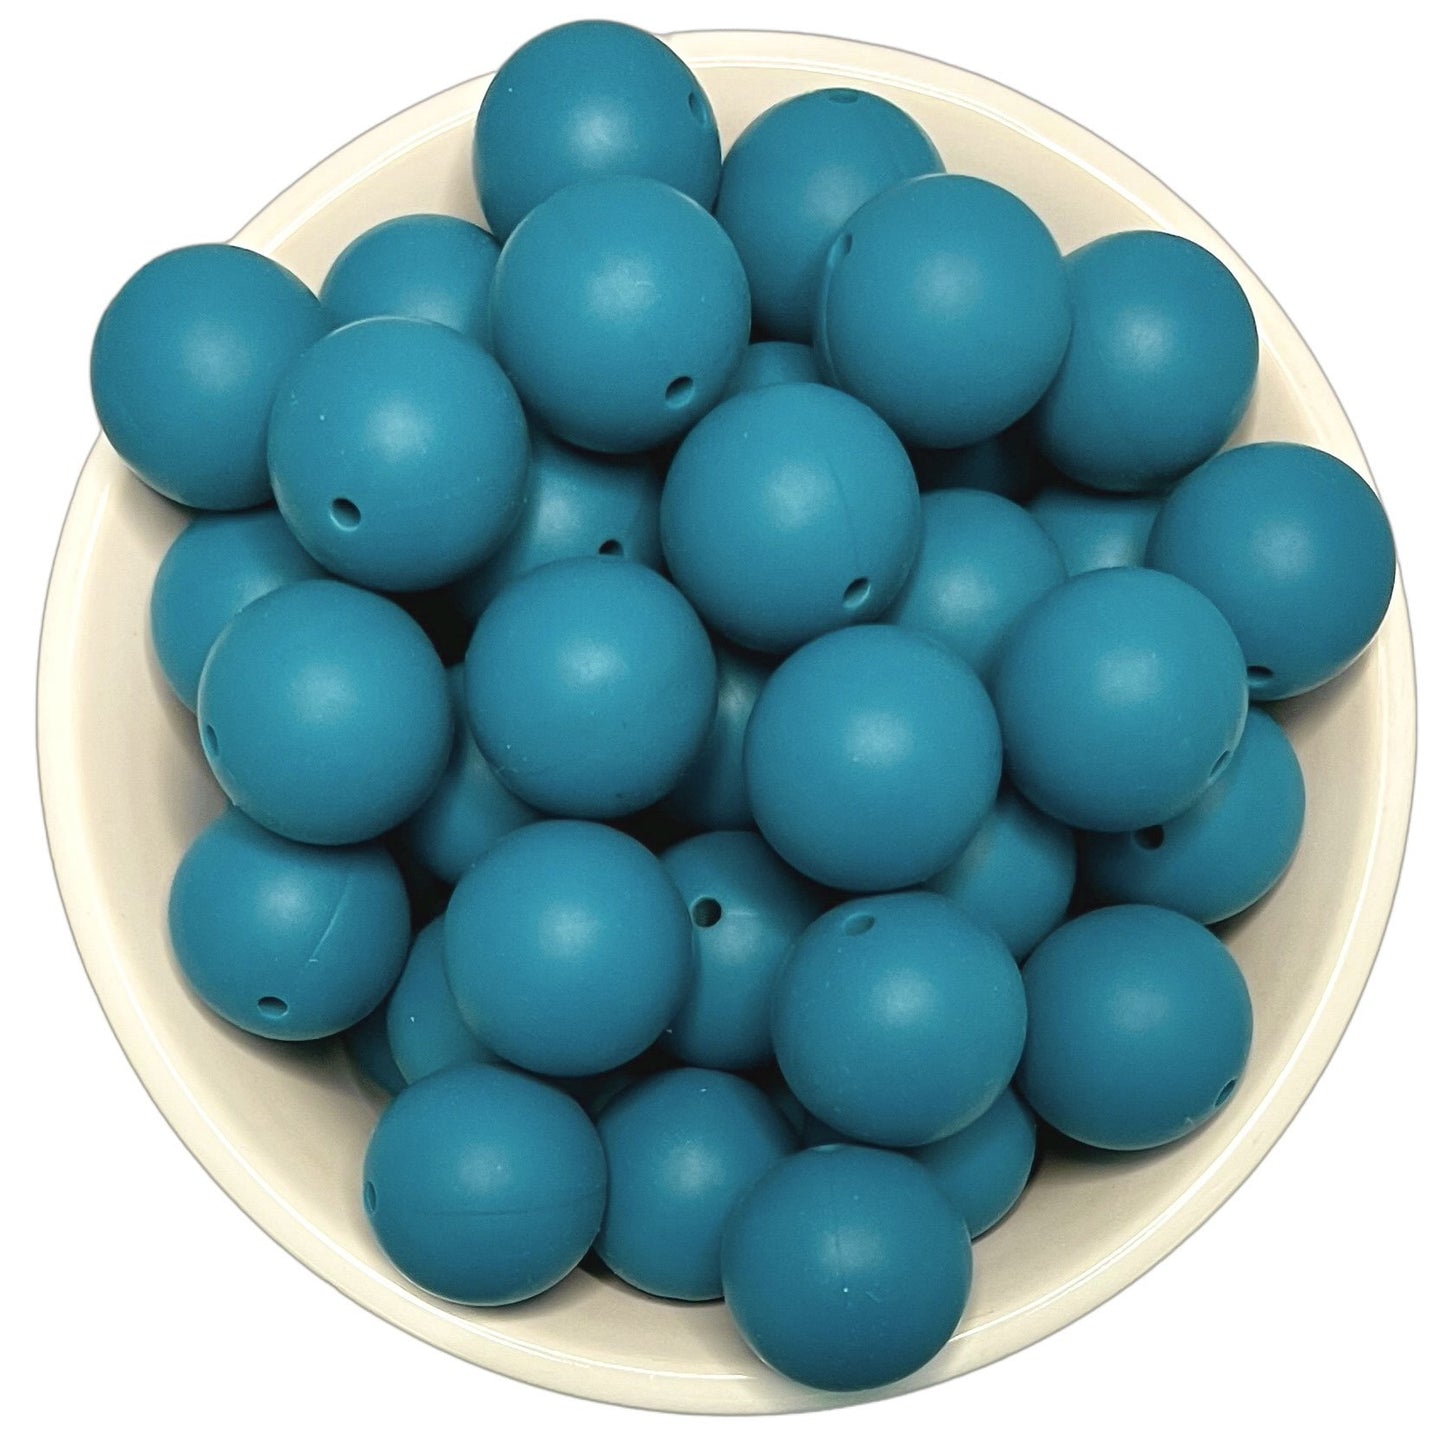 Biscay Blue 15mm Silicone Beads - 10 pk.